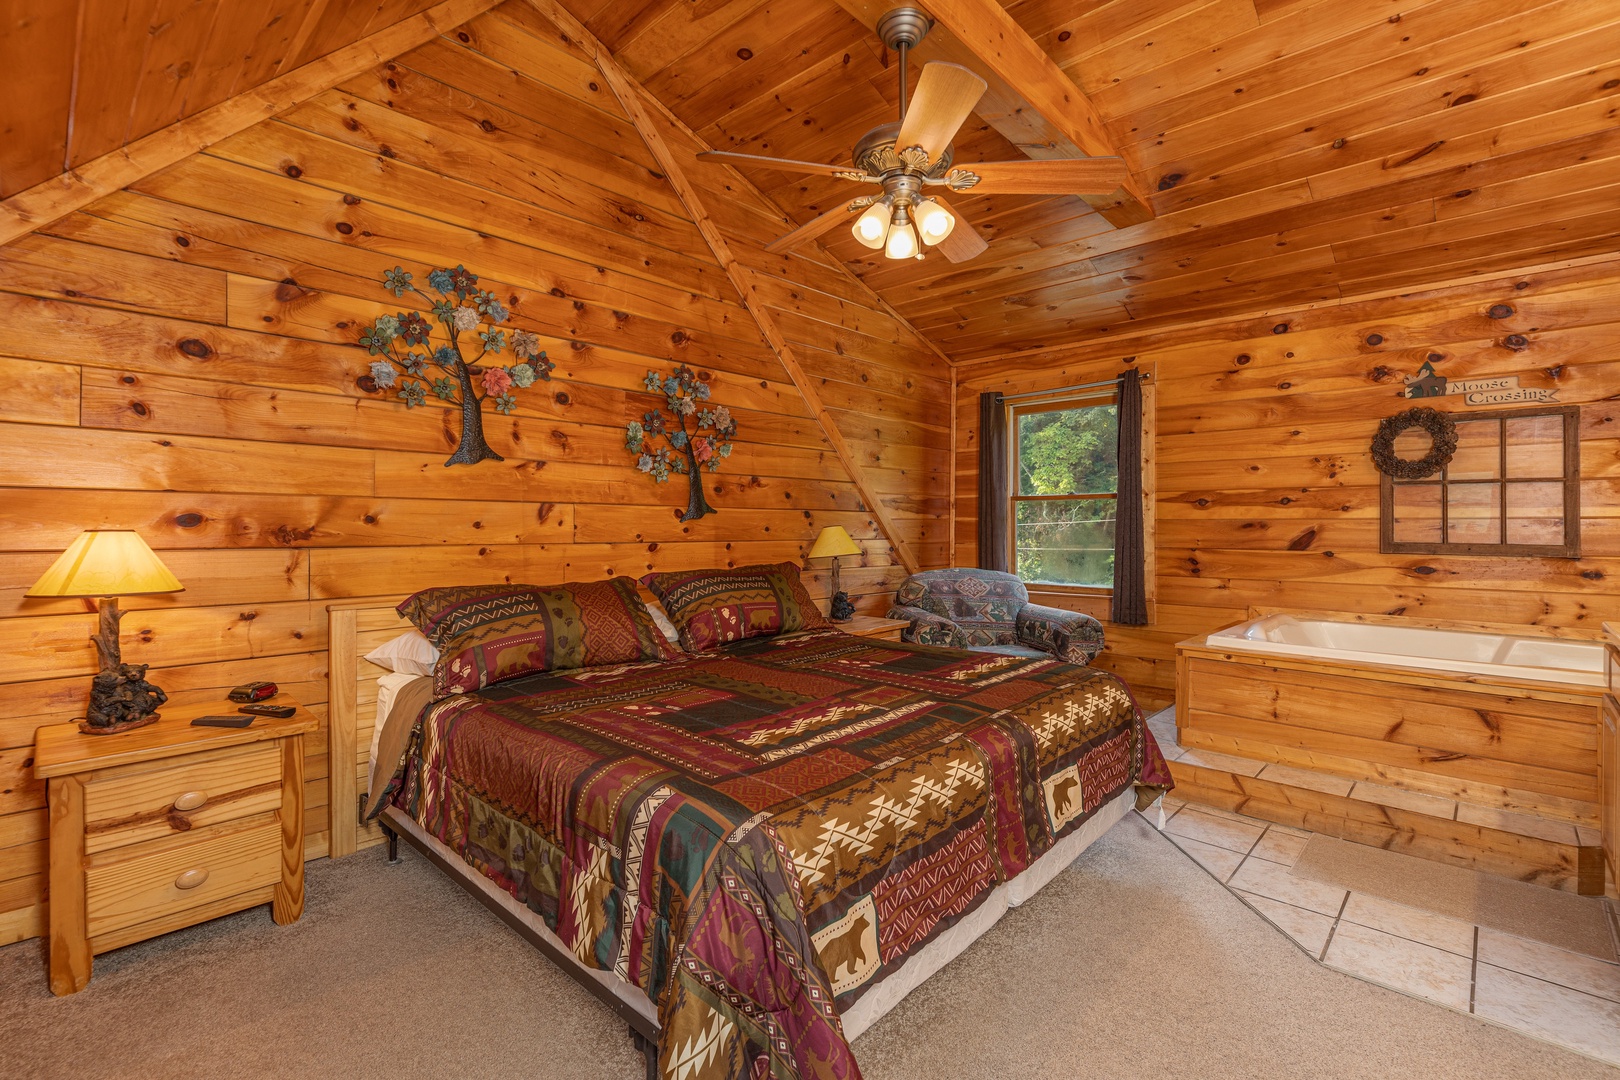 King bed, two night stands, two lamps, and a jacuzzi at Family Getaway, a 4 bedroom cabin rental located in Pigeon Forge